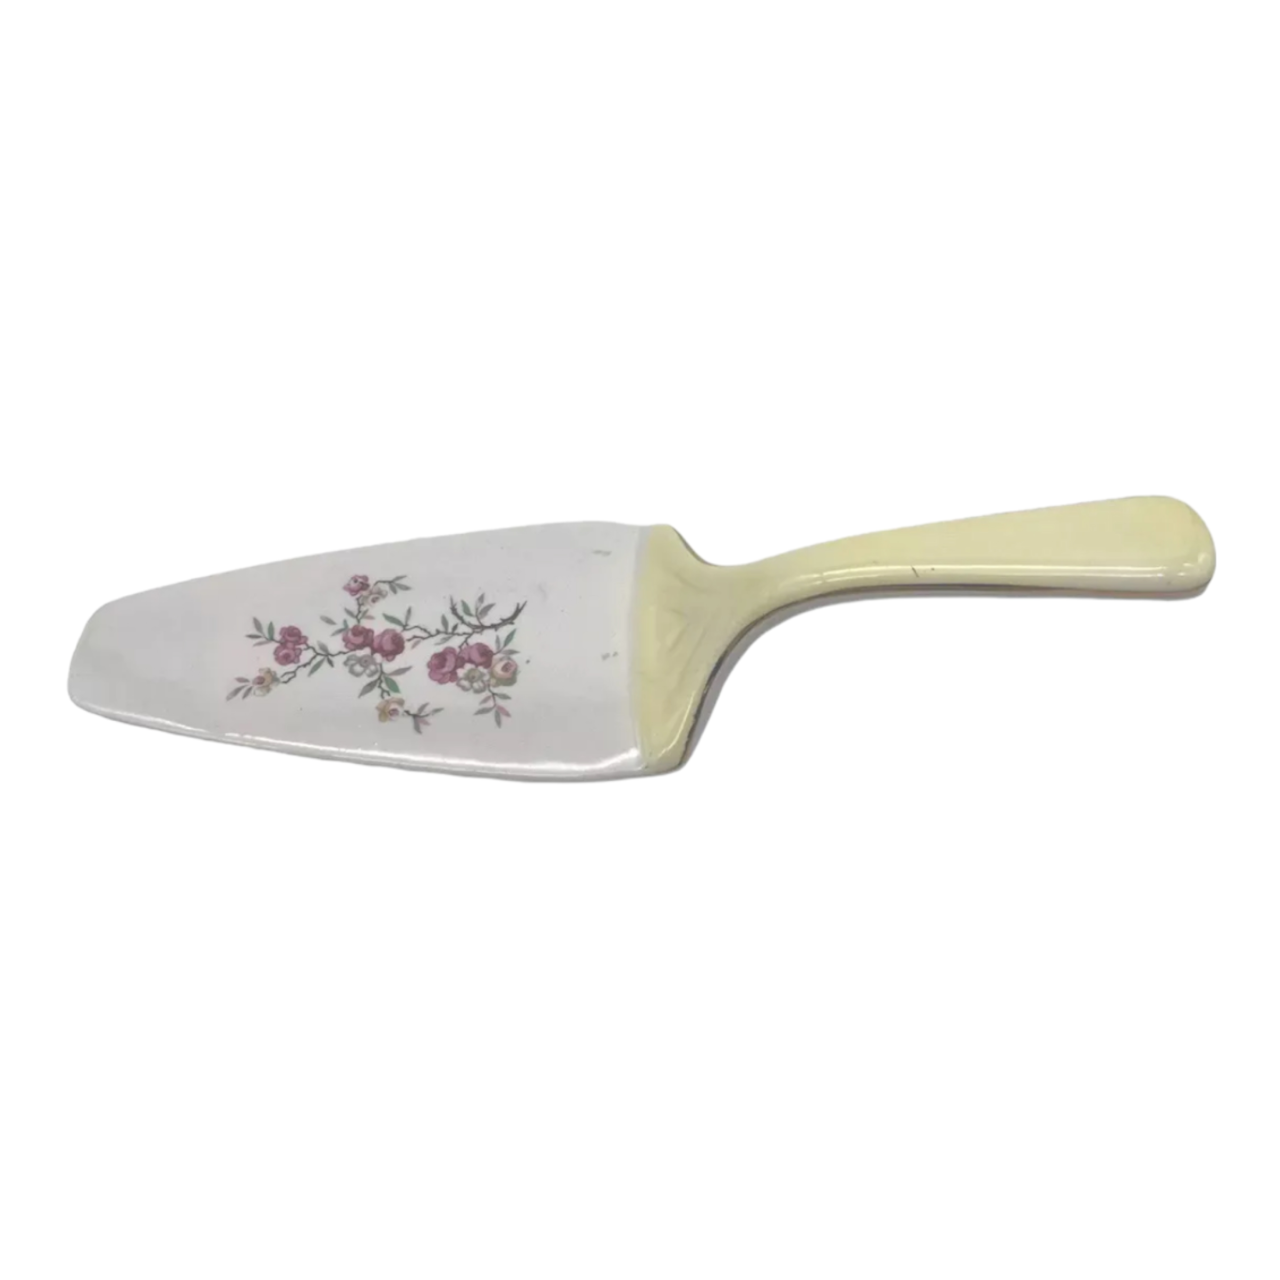 French vintage porcelain cake slice sold by All Things French Store